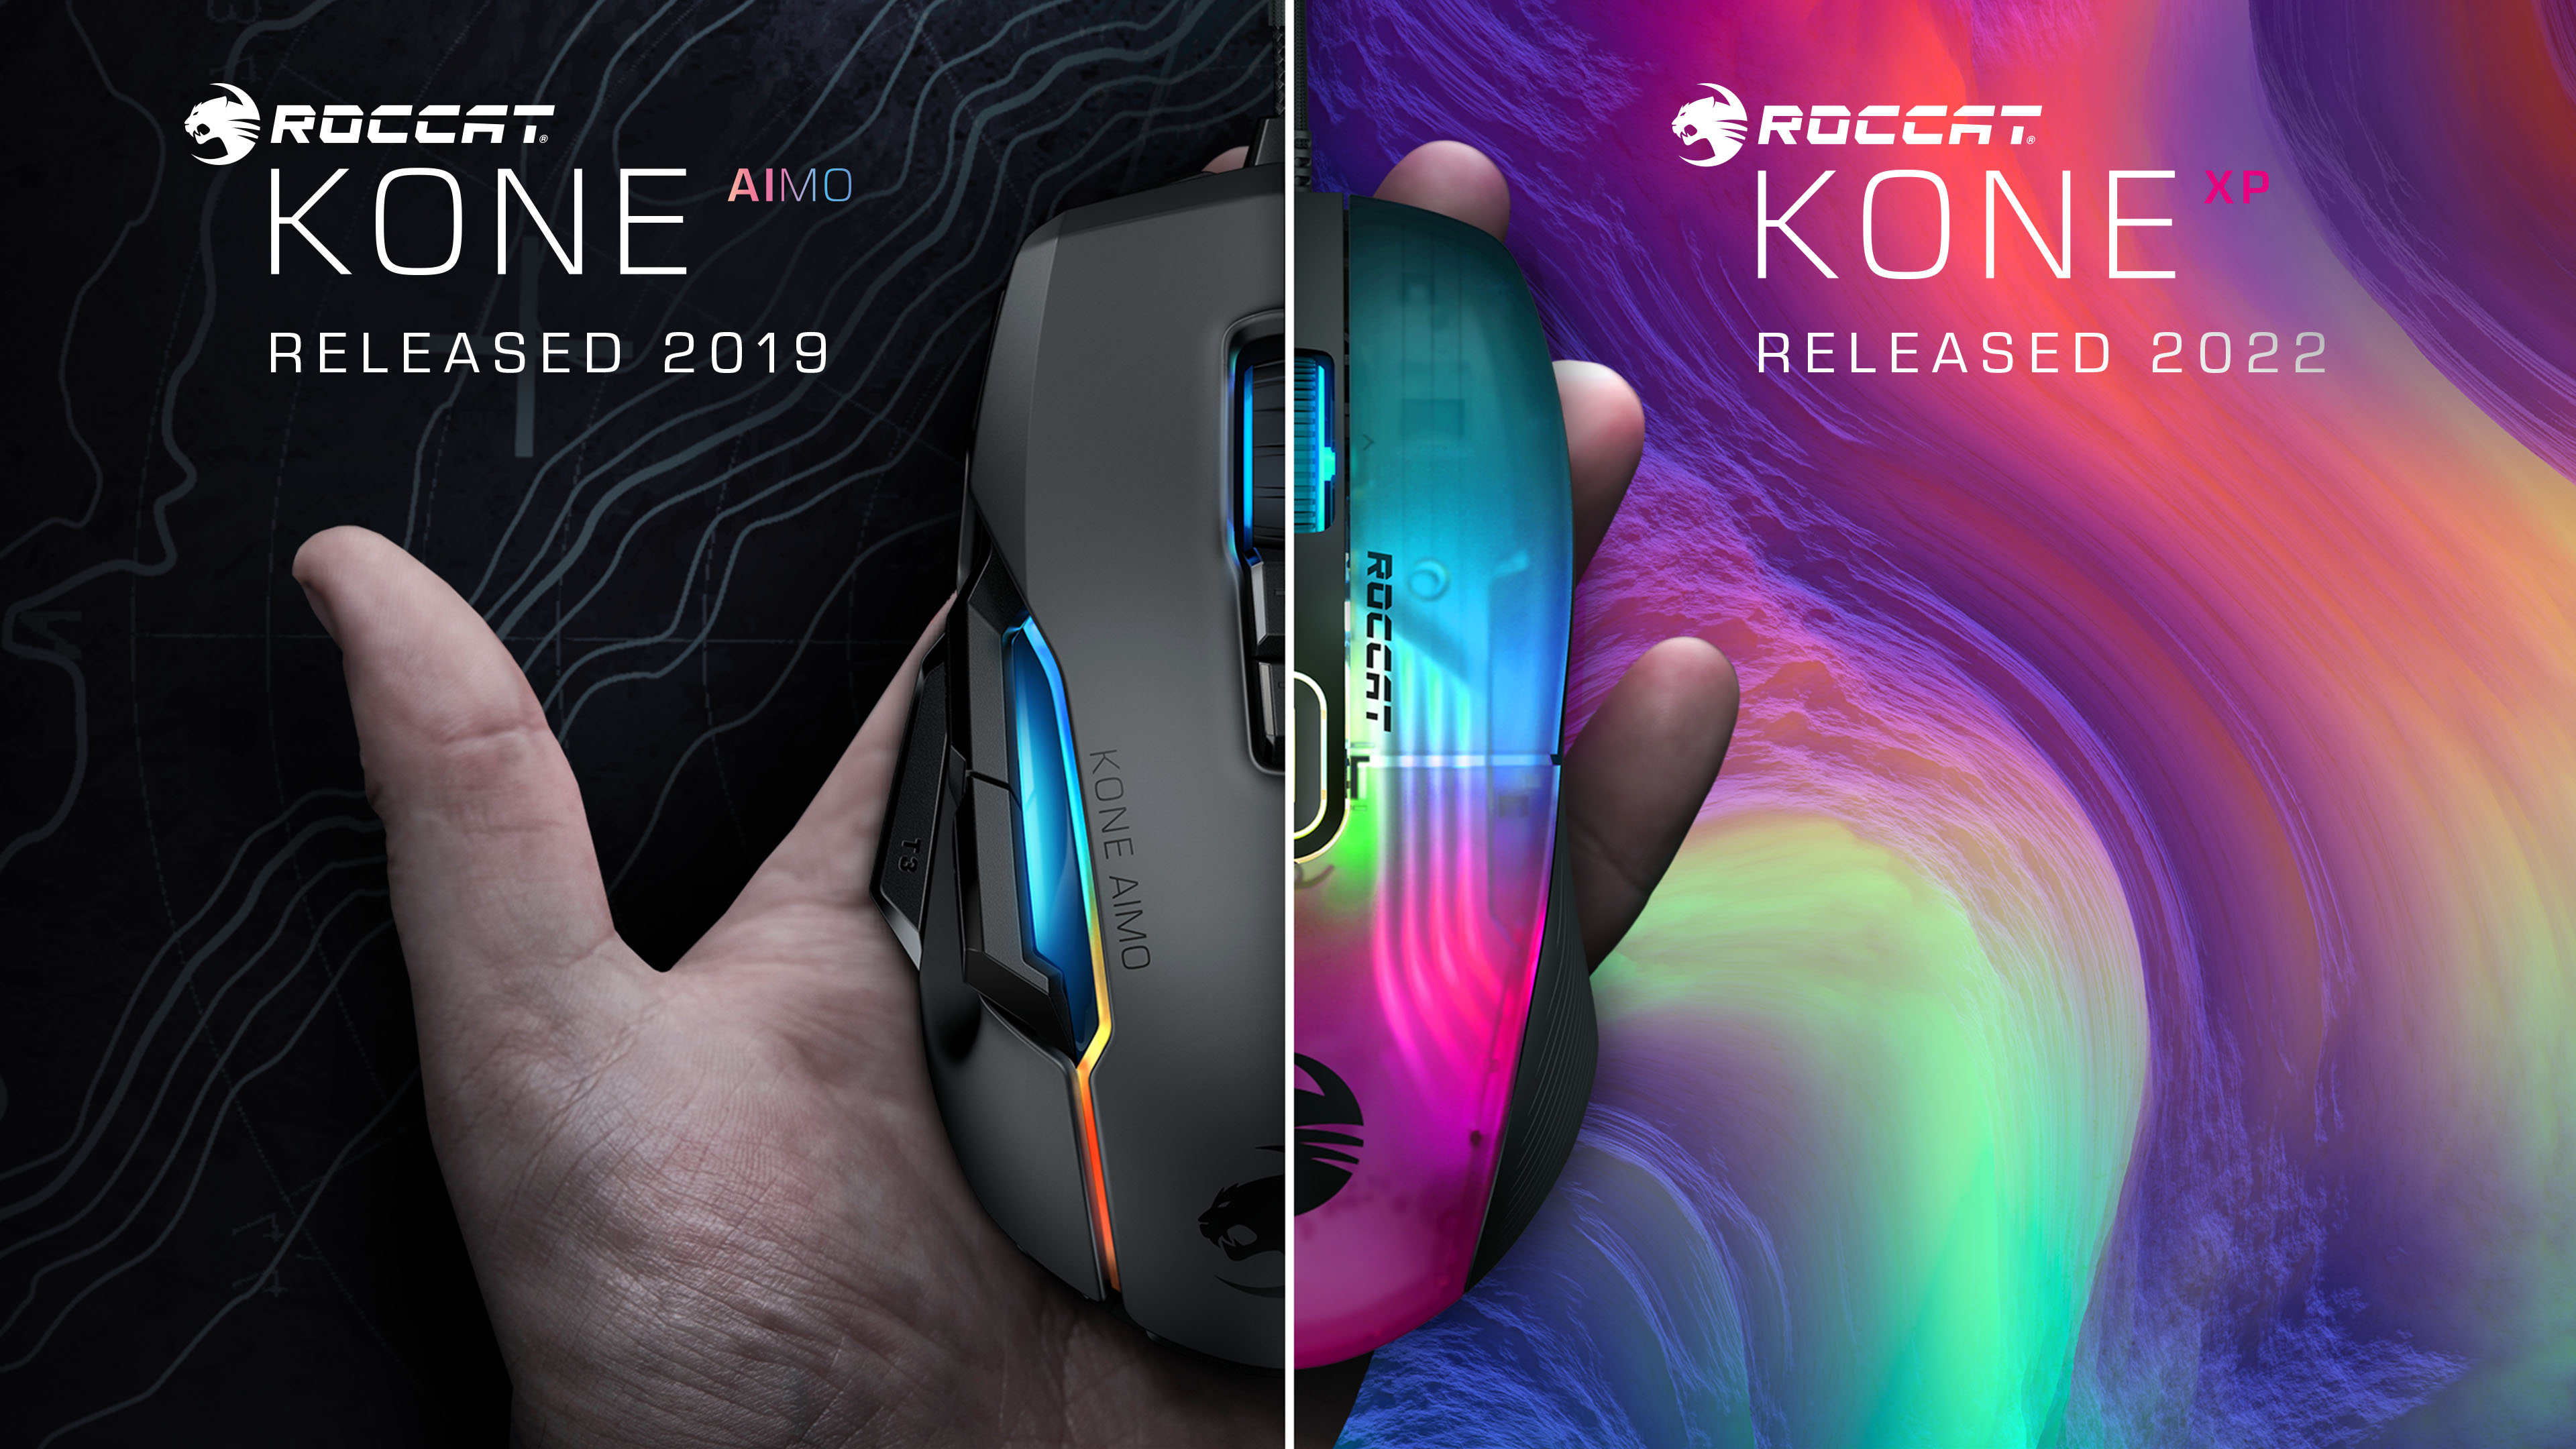 ROCCAT Kone AIMO Remastered PC Gaming Mouse